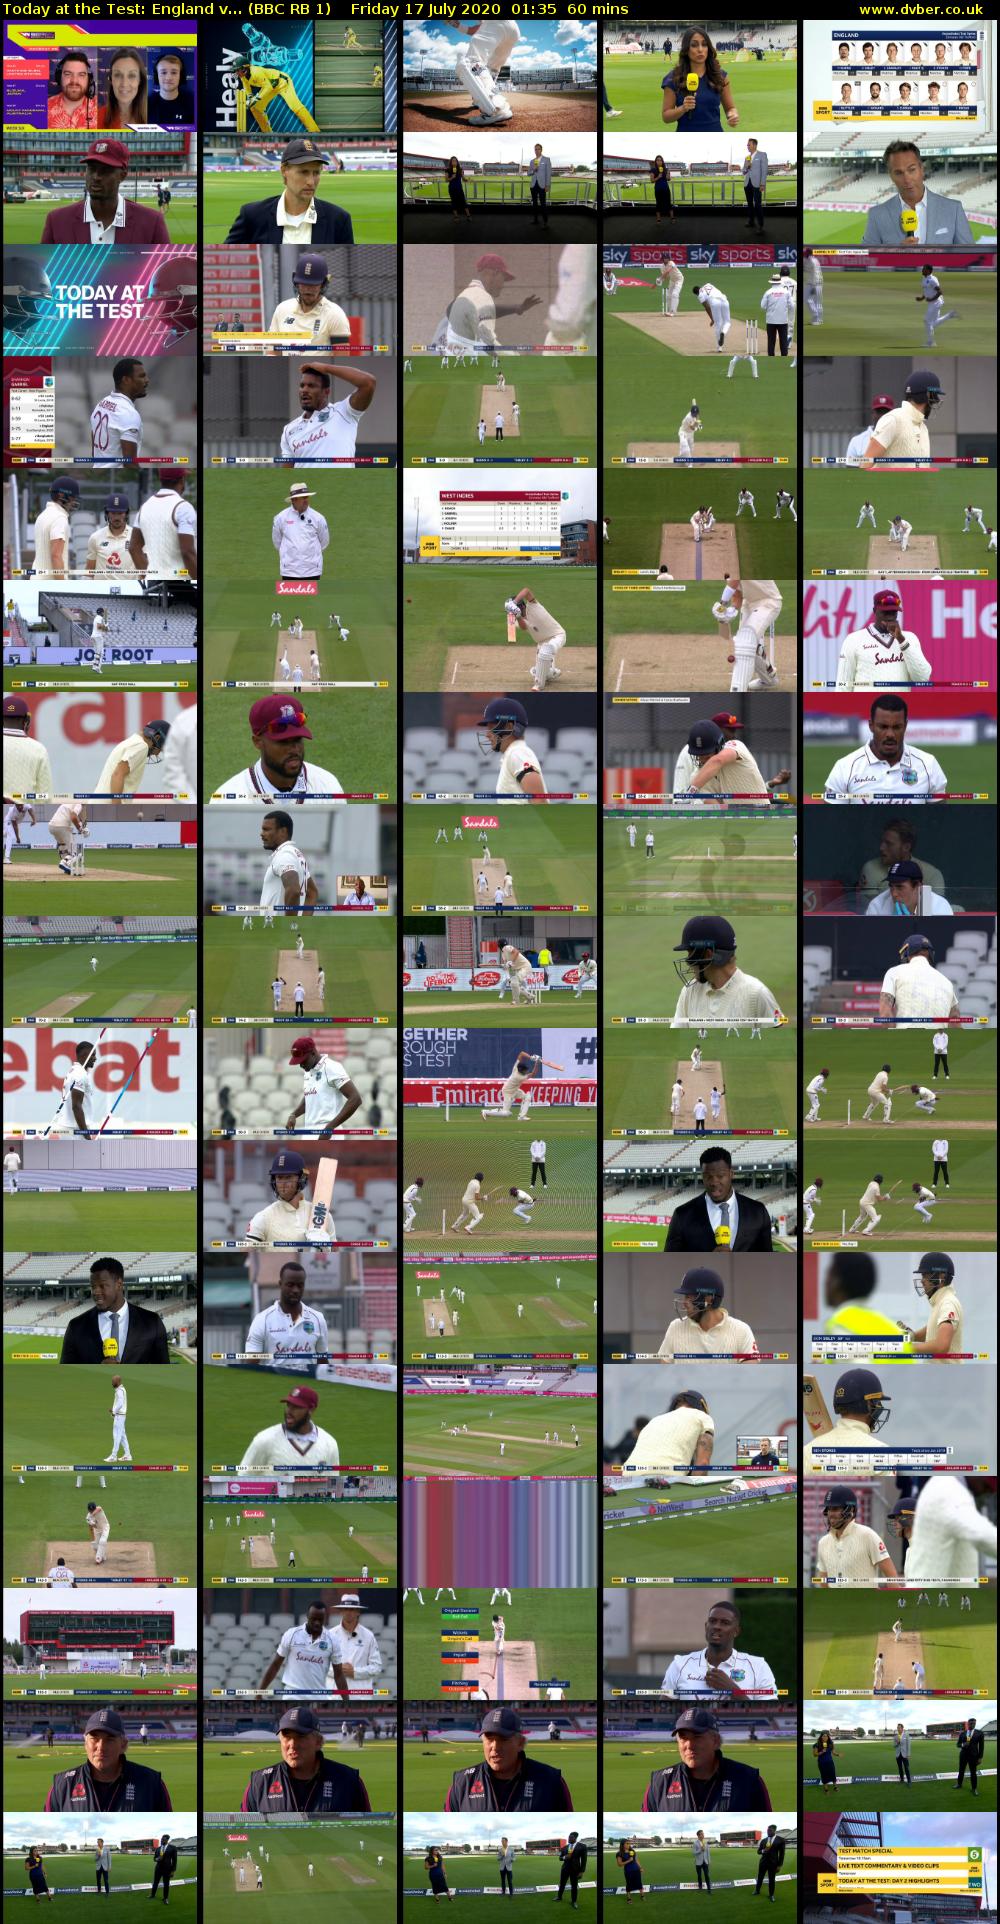 Today at the Test: England v... (BBC RB 1) Friday 17 July 2020 01:35 - 02:35